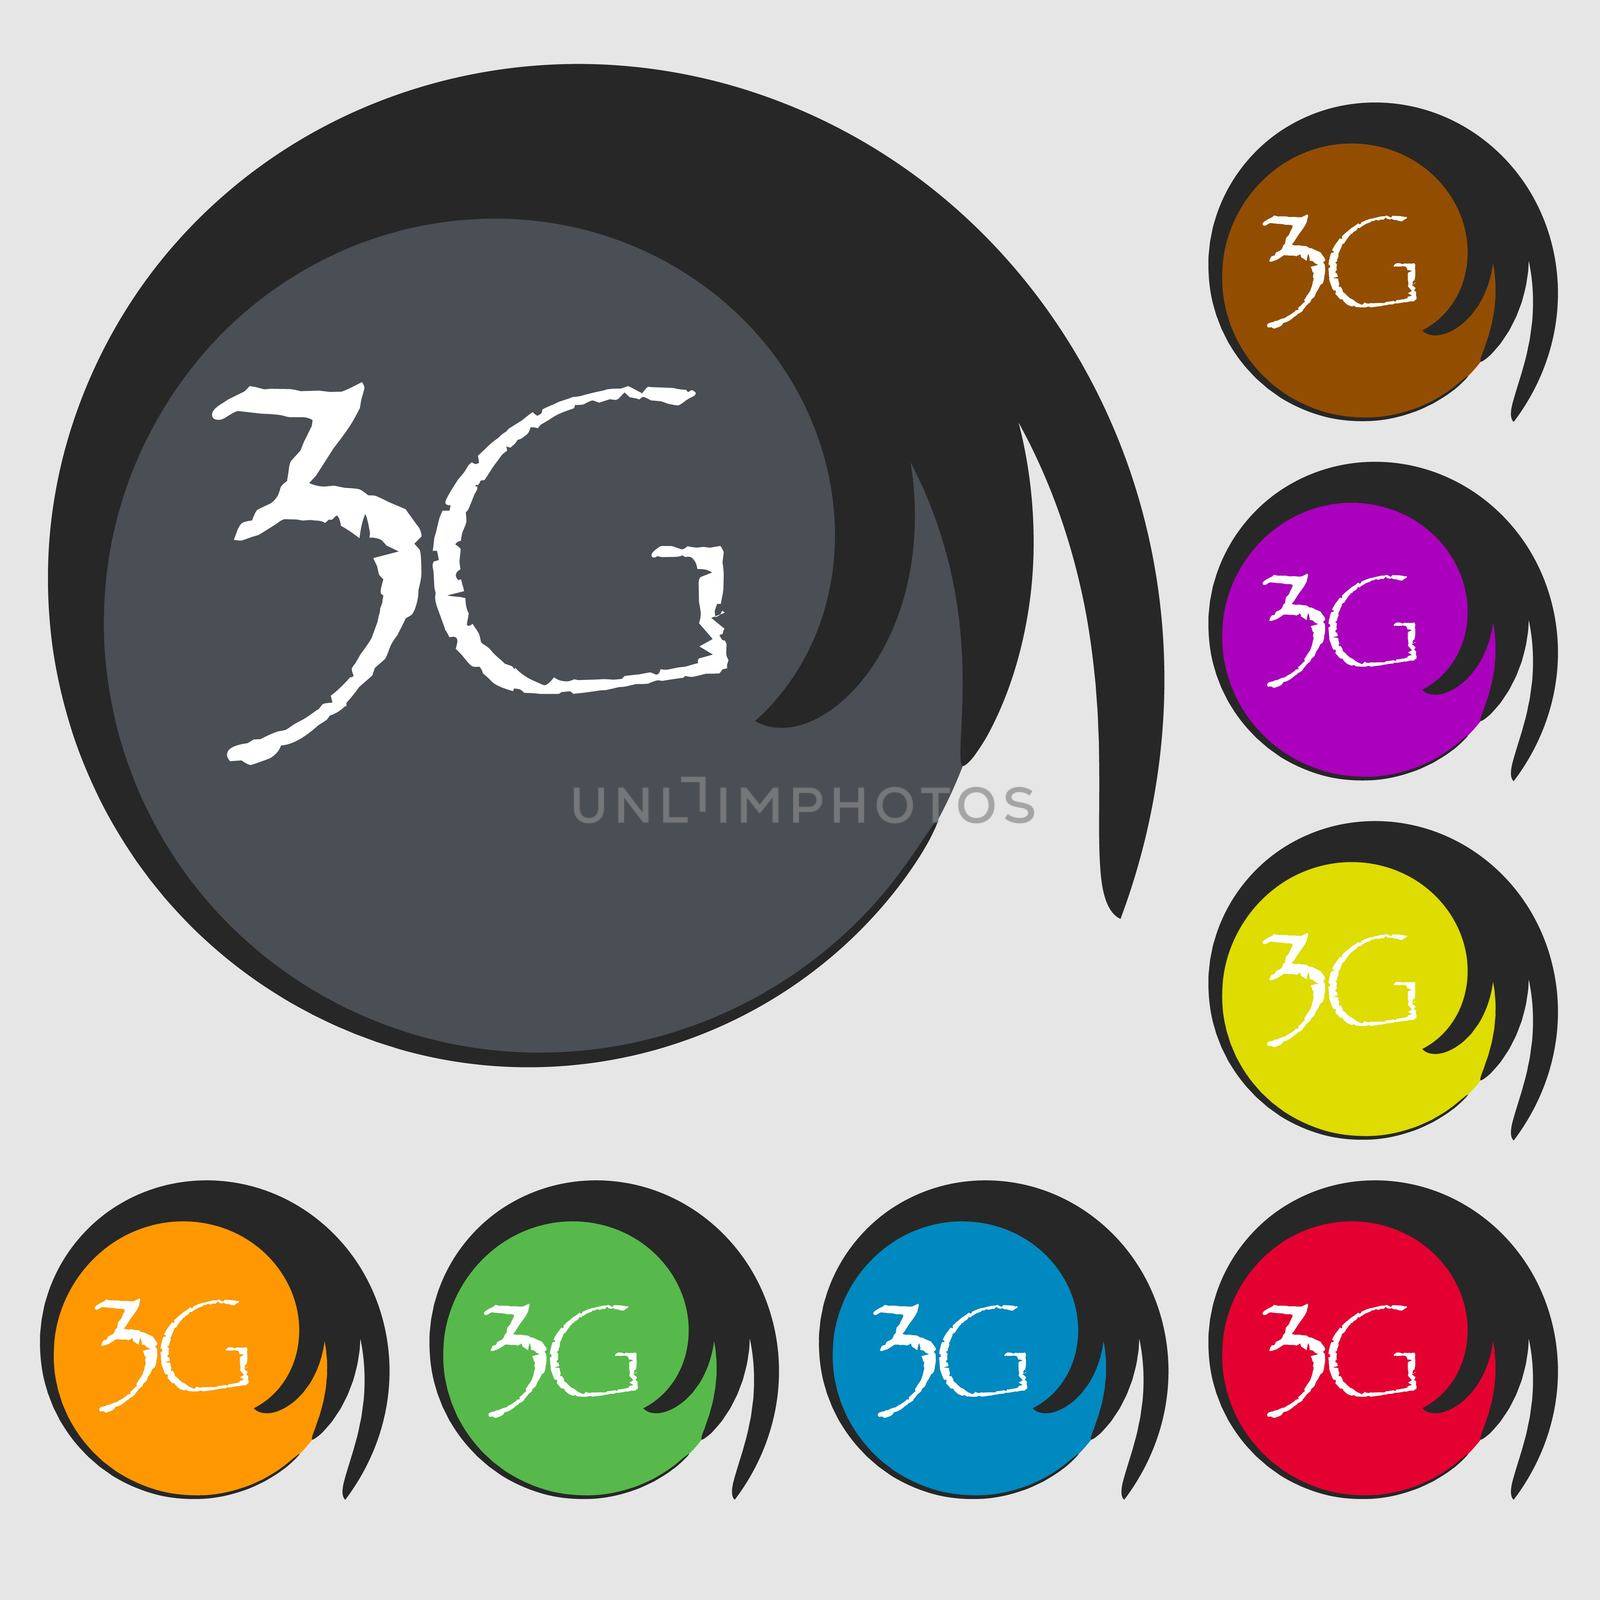 3G sign icon. Mobile telecommunications technology symbol. Symbols on eight colored buttons. illustration